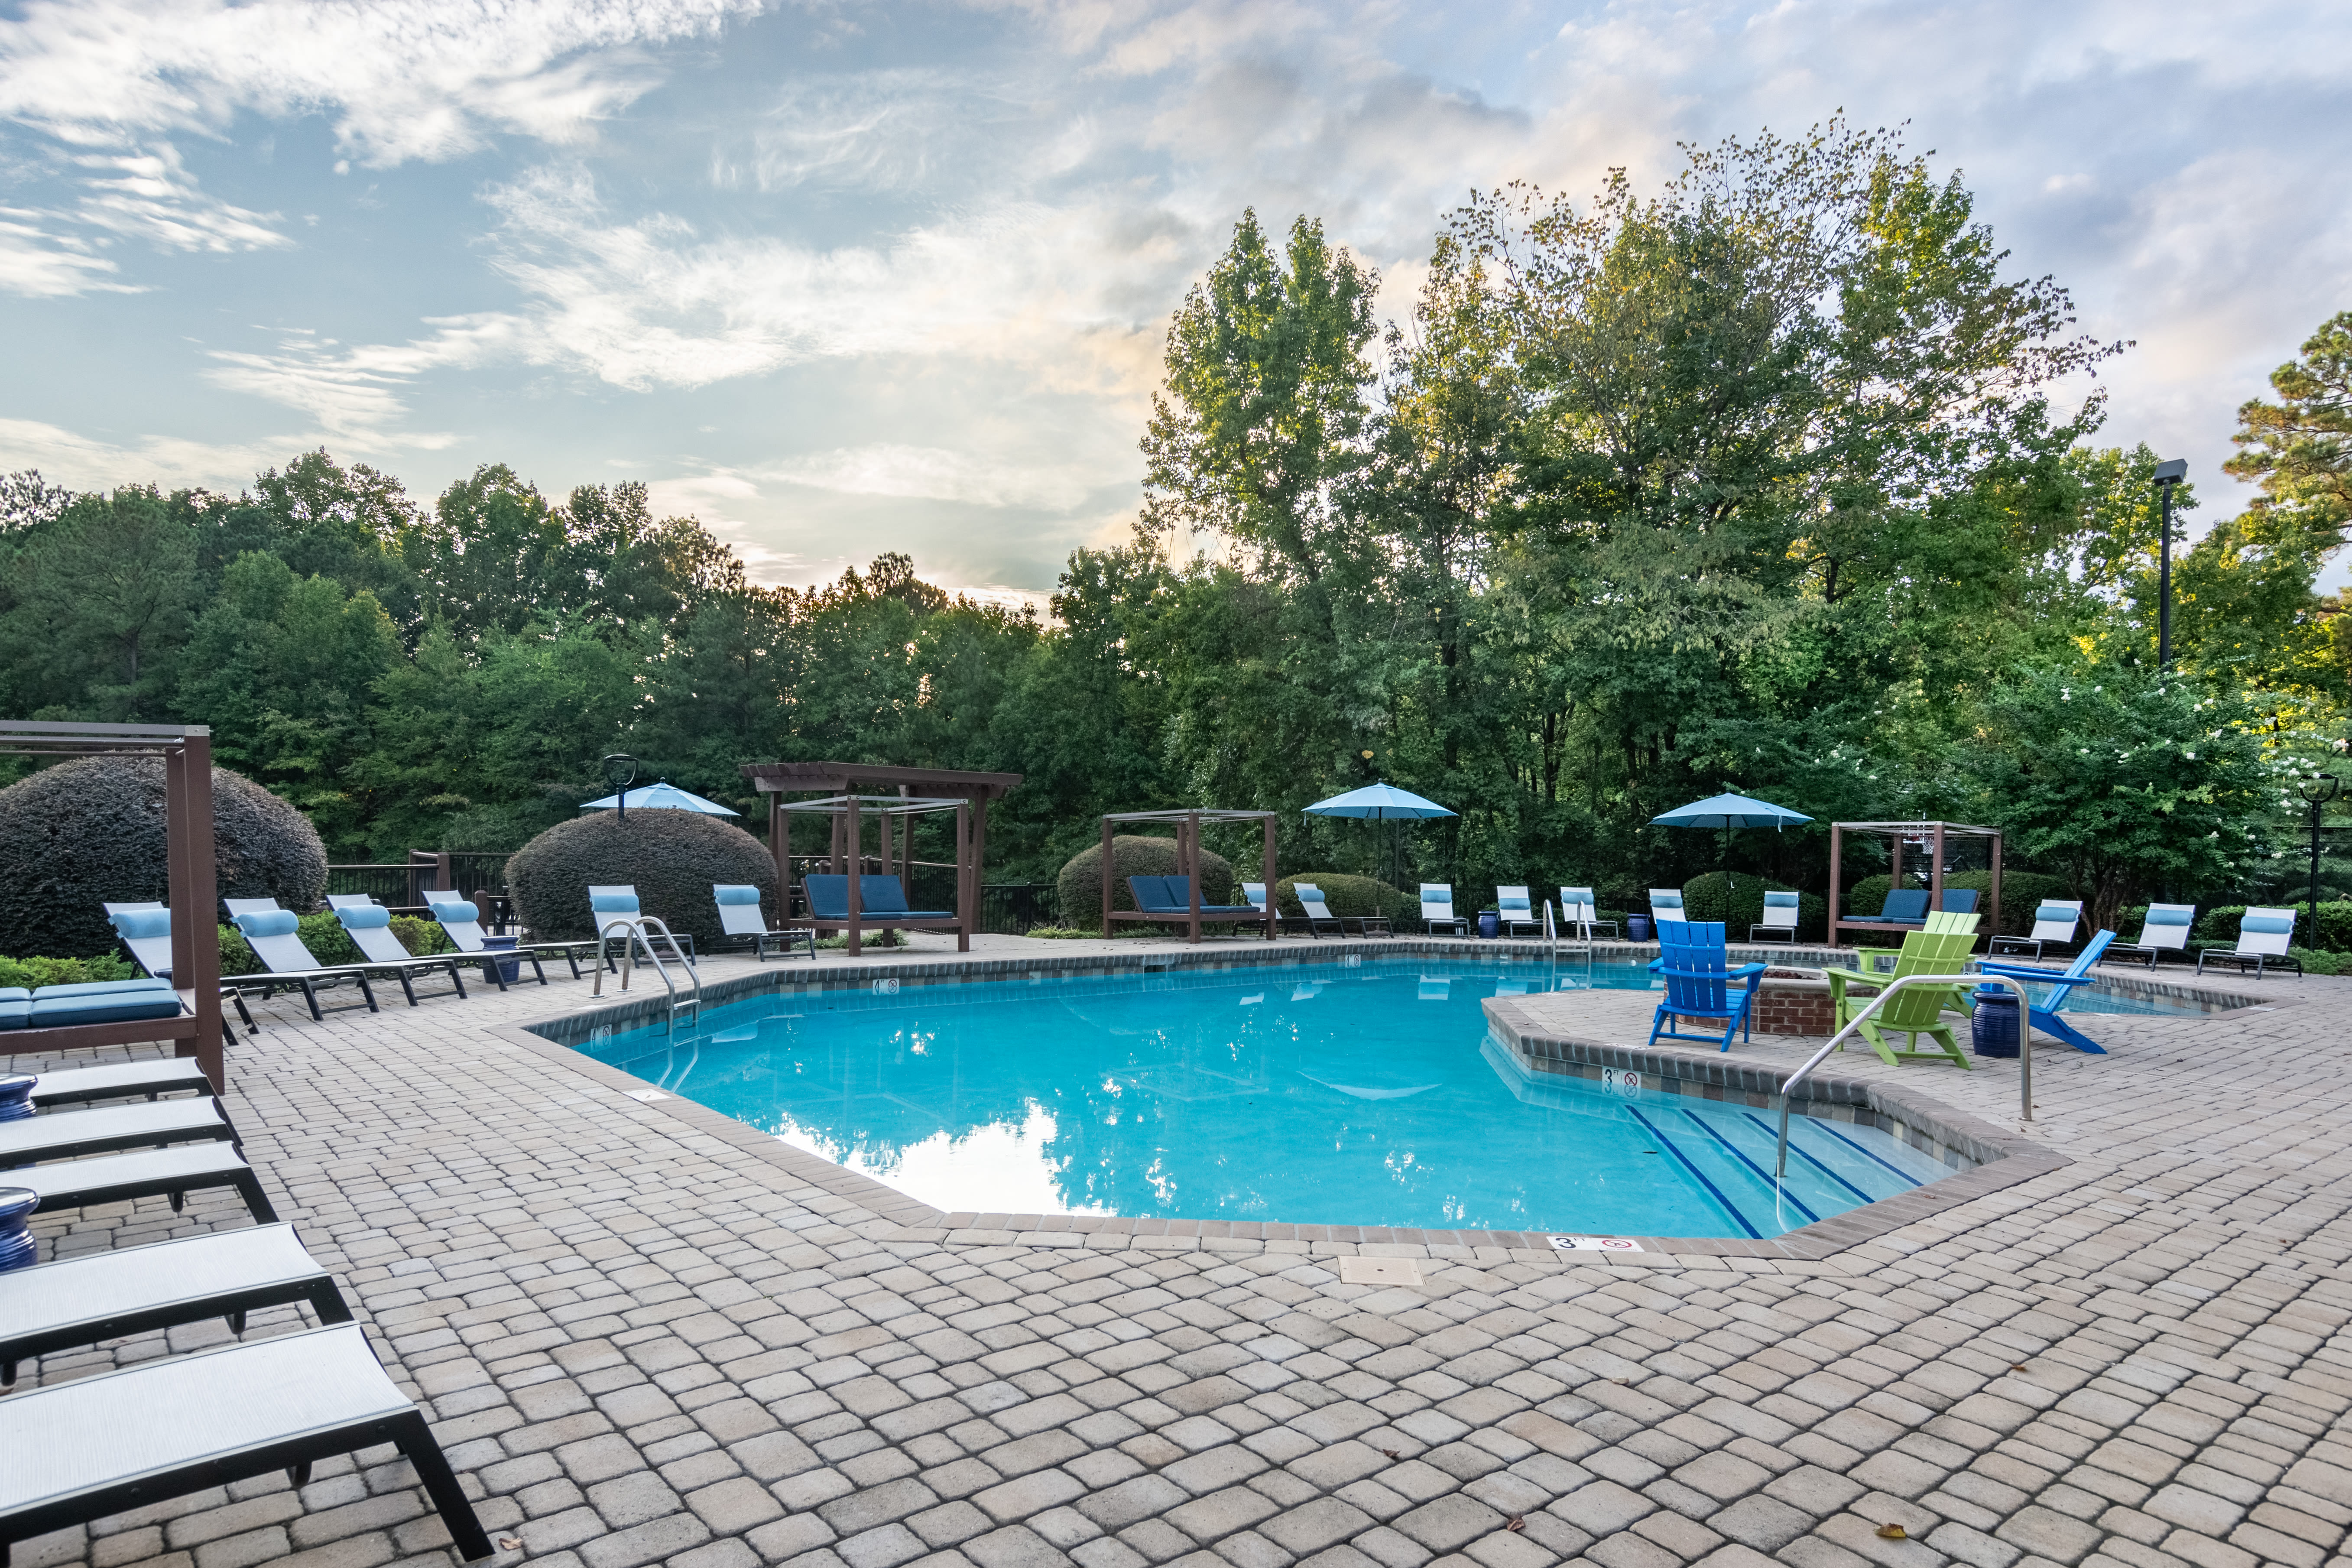 The sparkling swimming pool at Copper Mill Apartments in Richmond, Virginia